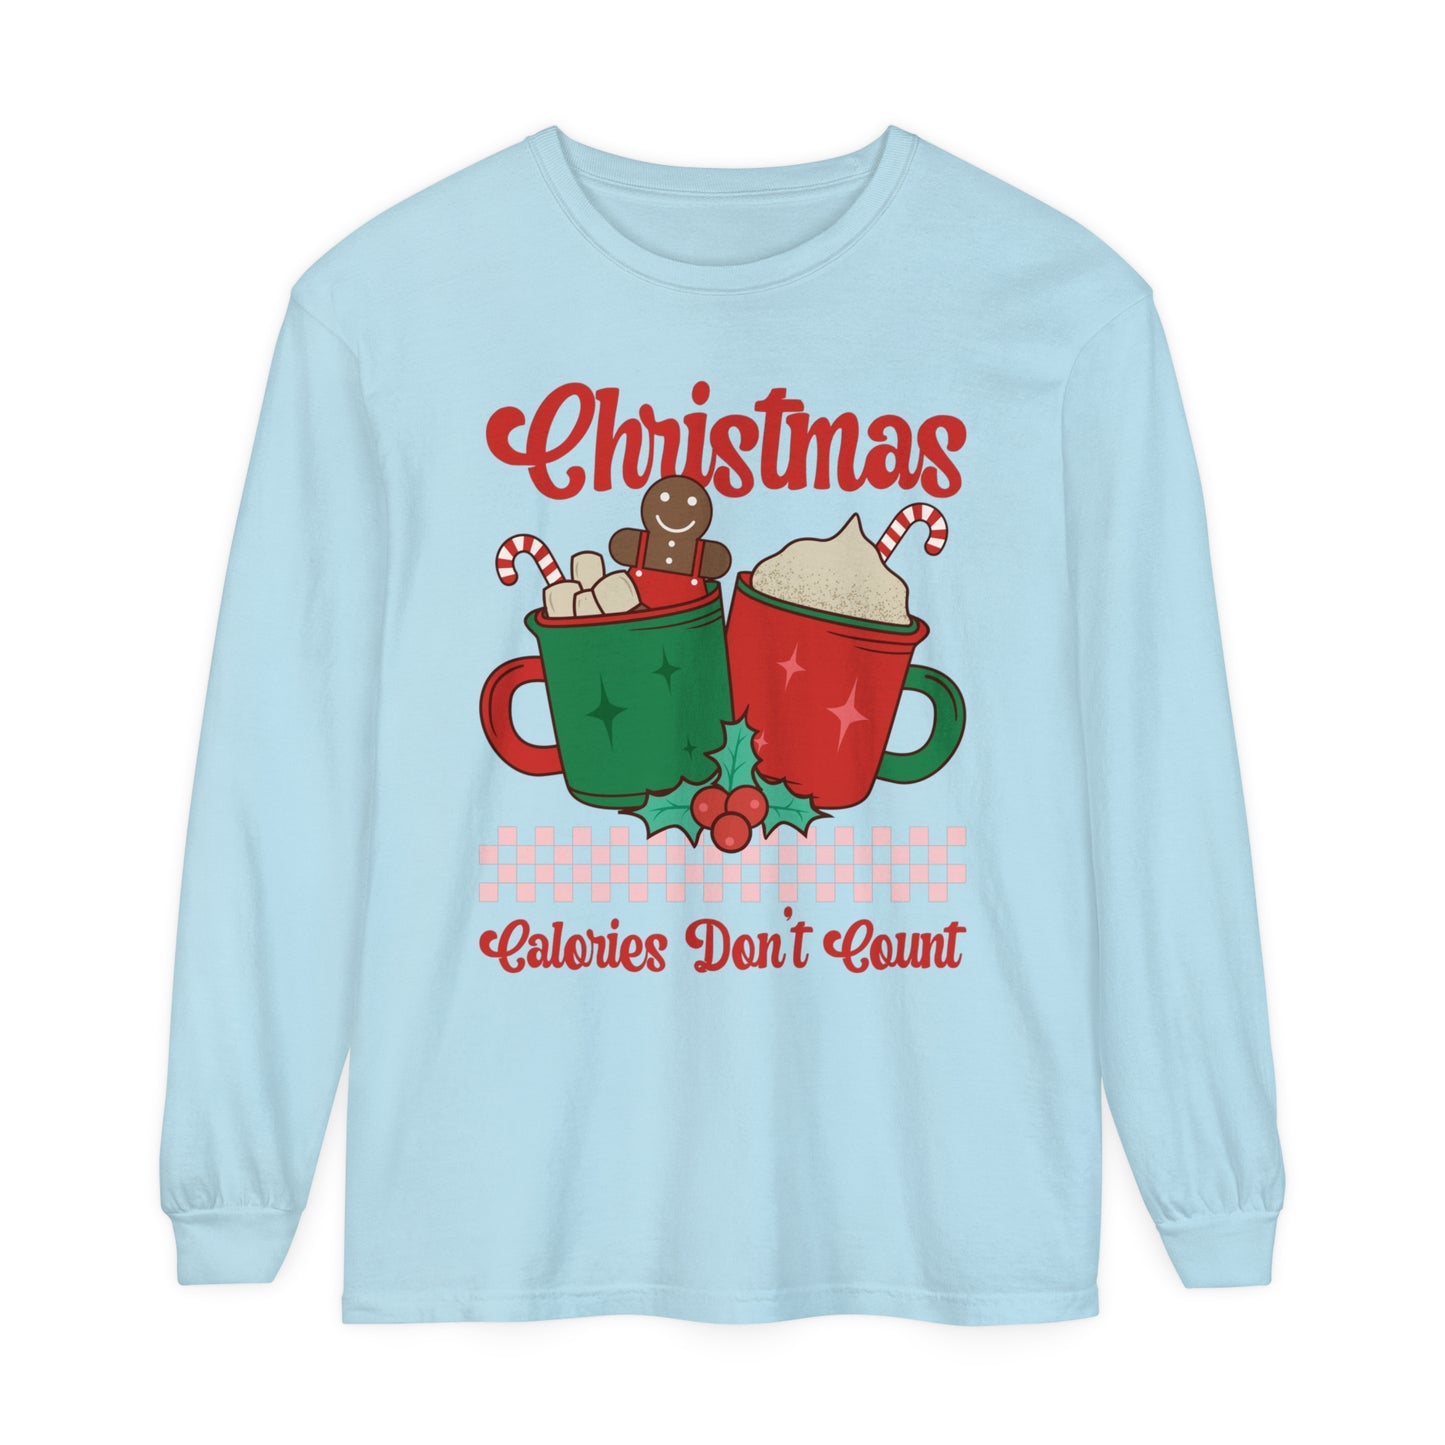 Christmas Calories Don't Count Women's Christmas Holiday Loose Long Sleeve T-Shirt